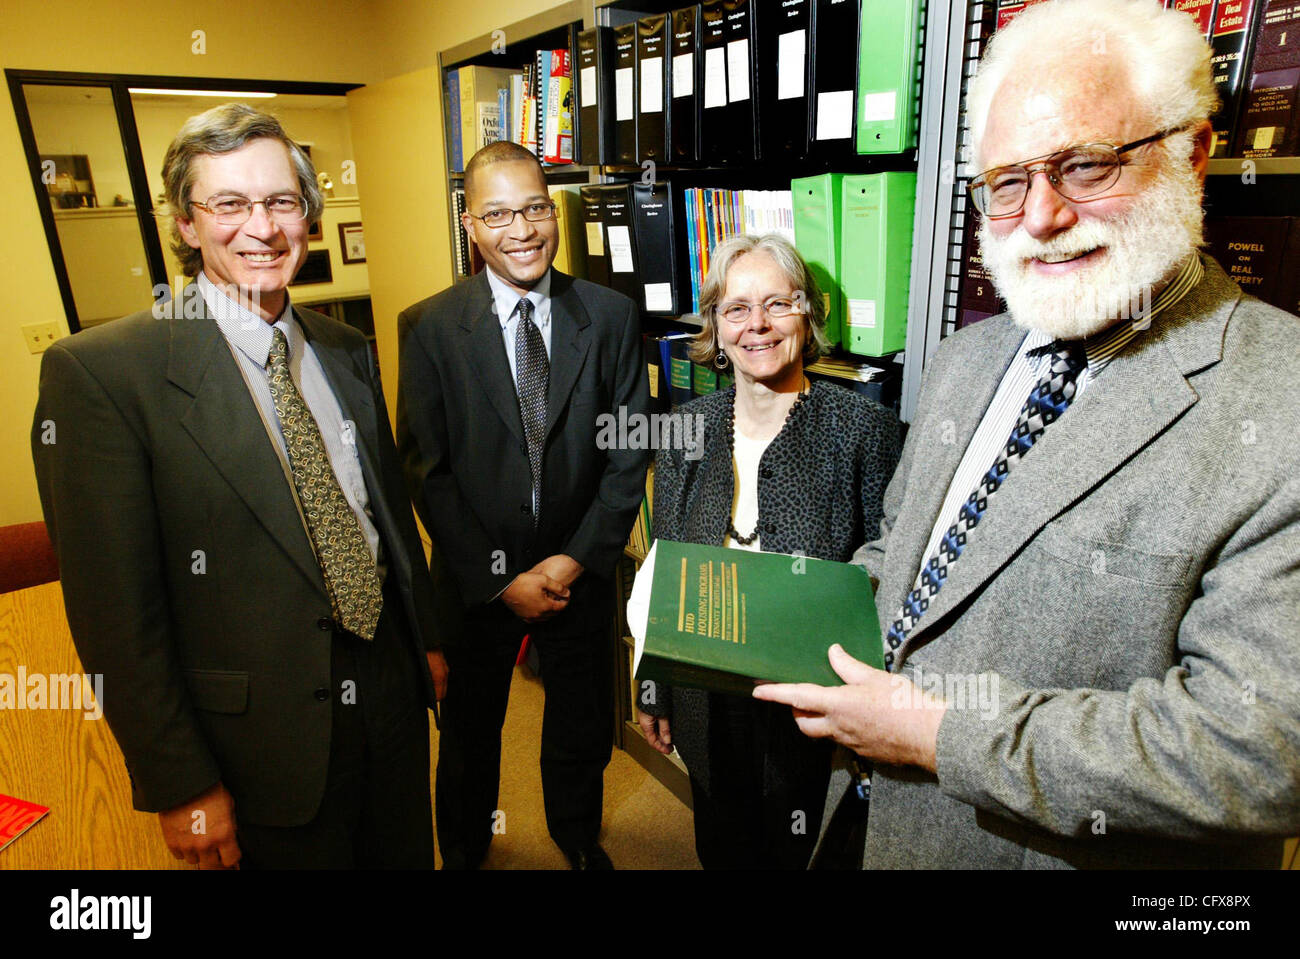 National Housing Law Project Attorneys Jim Grow, left, Alaric degrafinried, Catherine Bishop and executive director Gideon Anders at their office in Oakland, Calif., on Wednesday Mar. 28, 2007. Their company won $500,000 from the MacArthur Foundation for its effort advocating on behalf of tennants a Stock Photo